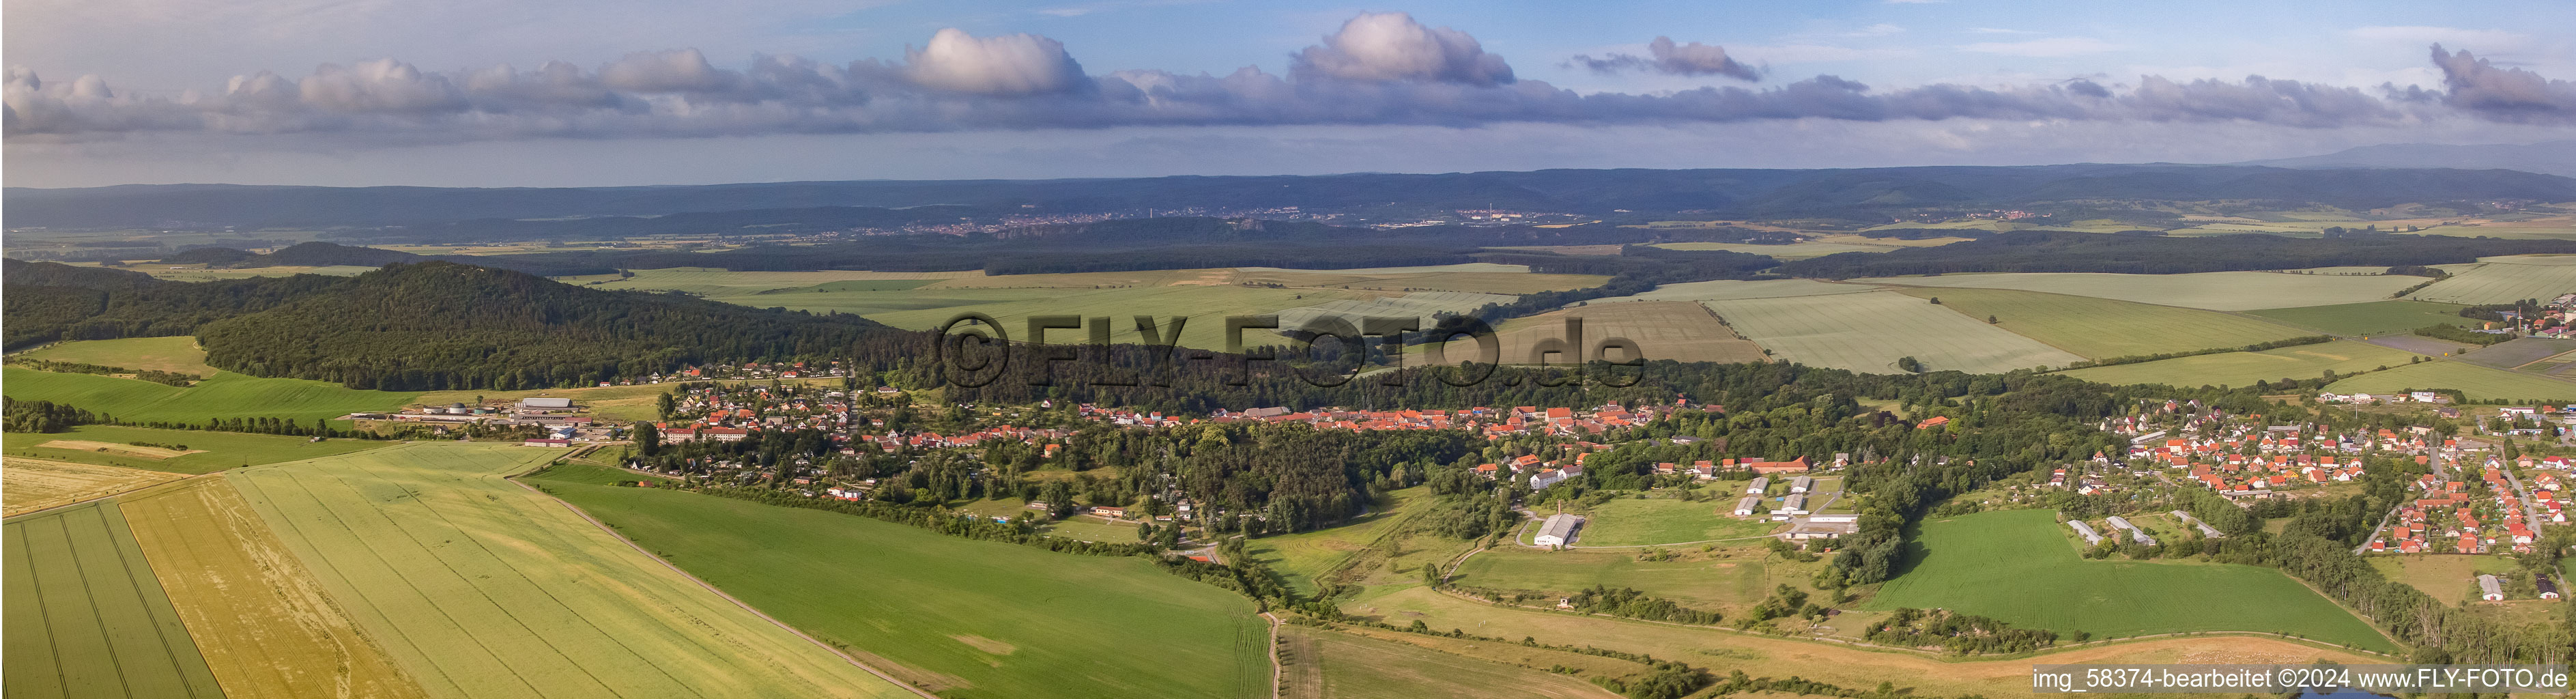 Panoramic perspective Village - view on the edge of agricultural fields and farmland in Langenstein in the state Saxony-Anhalt, Germany